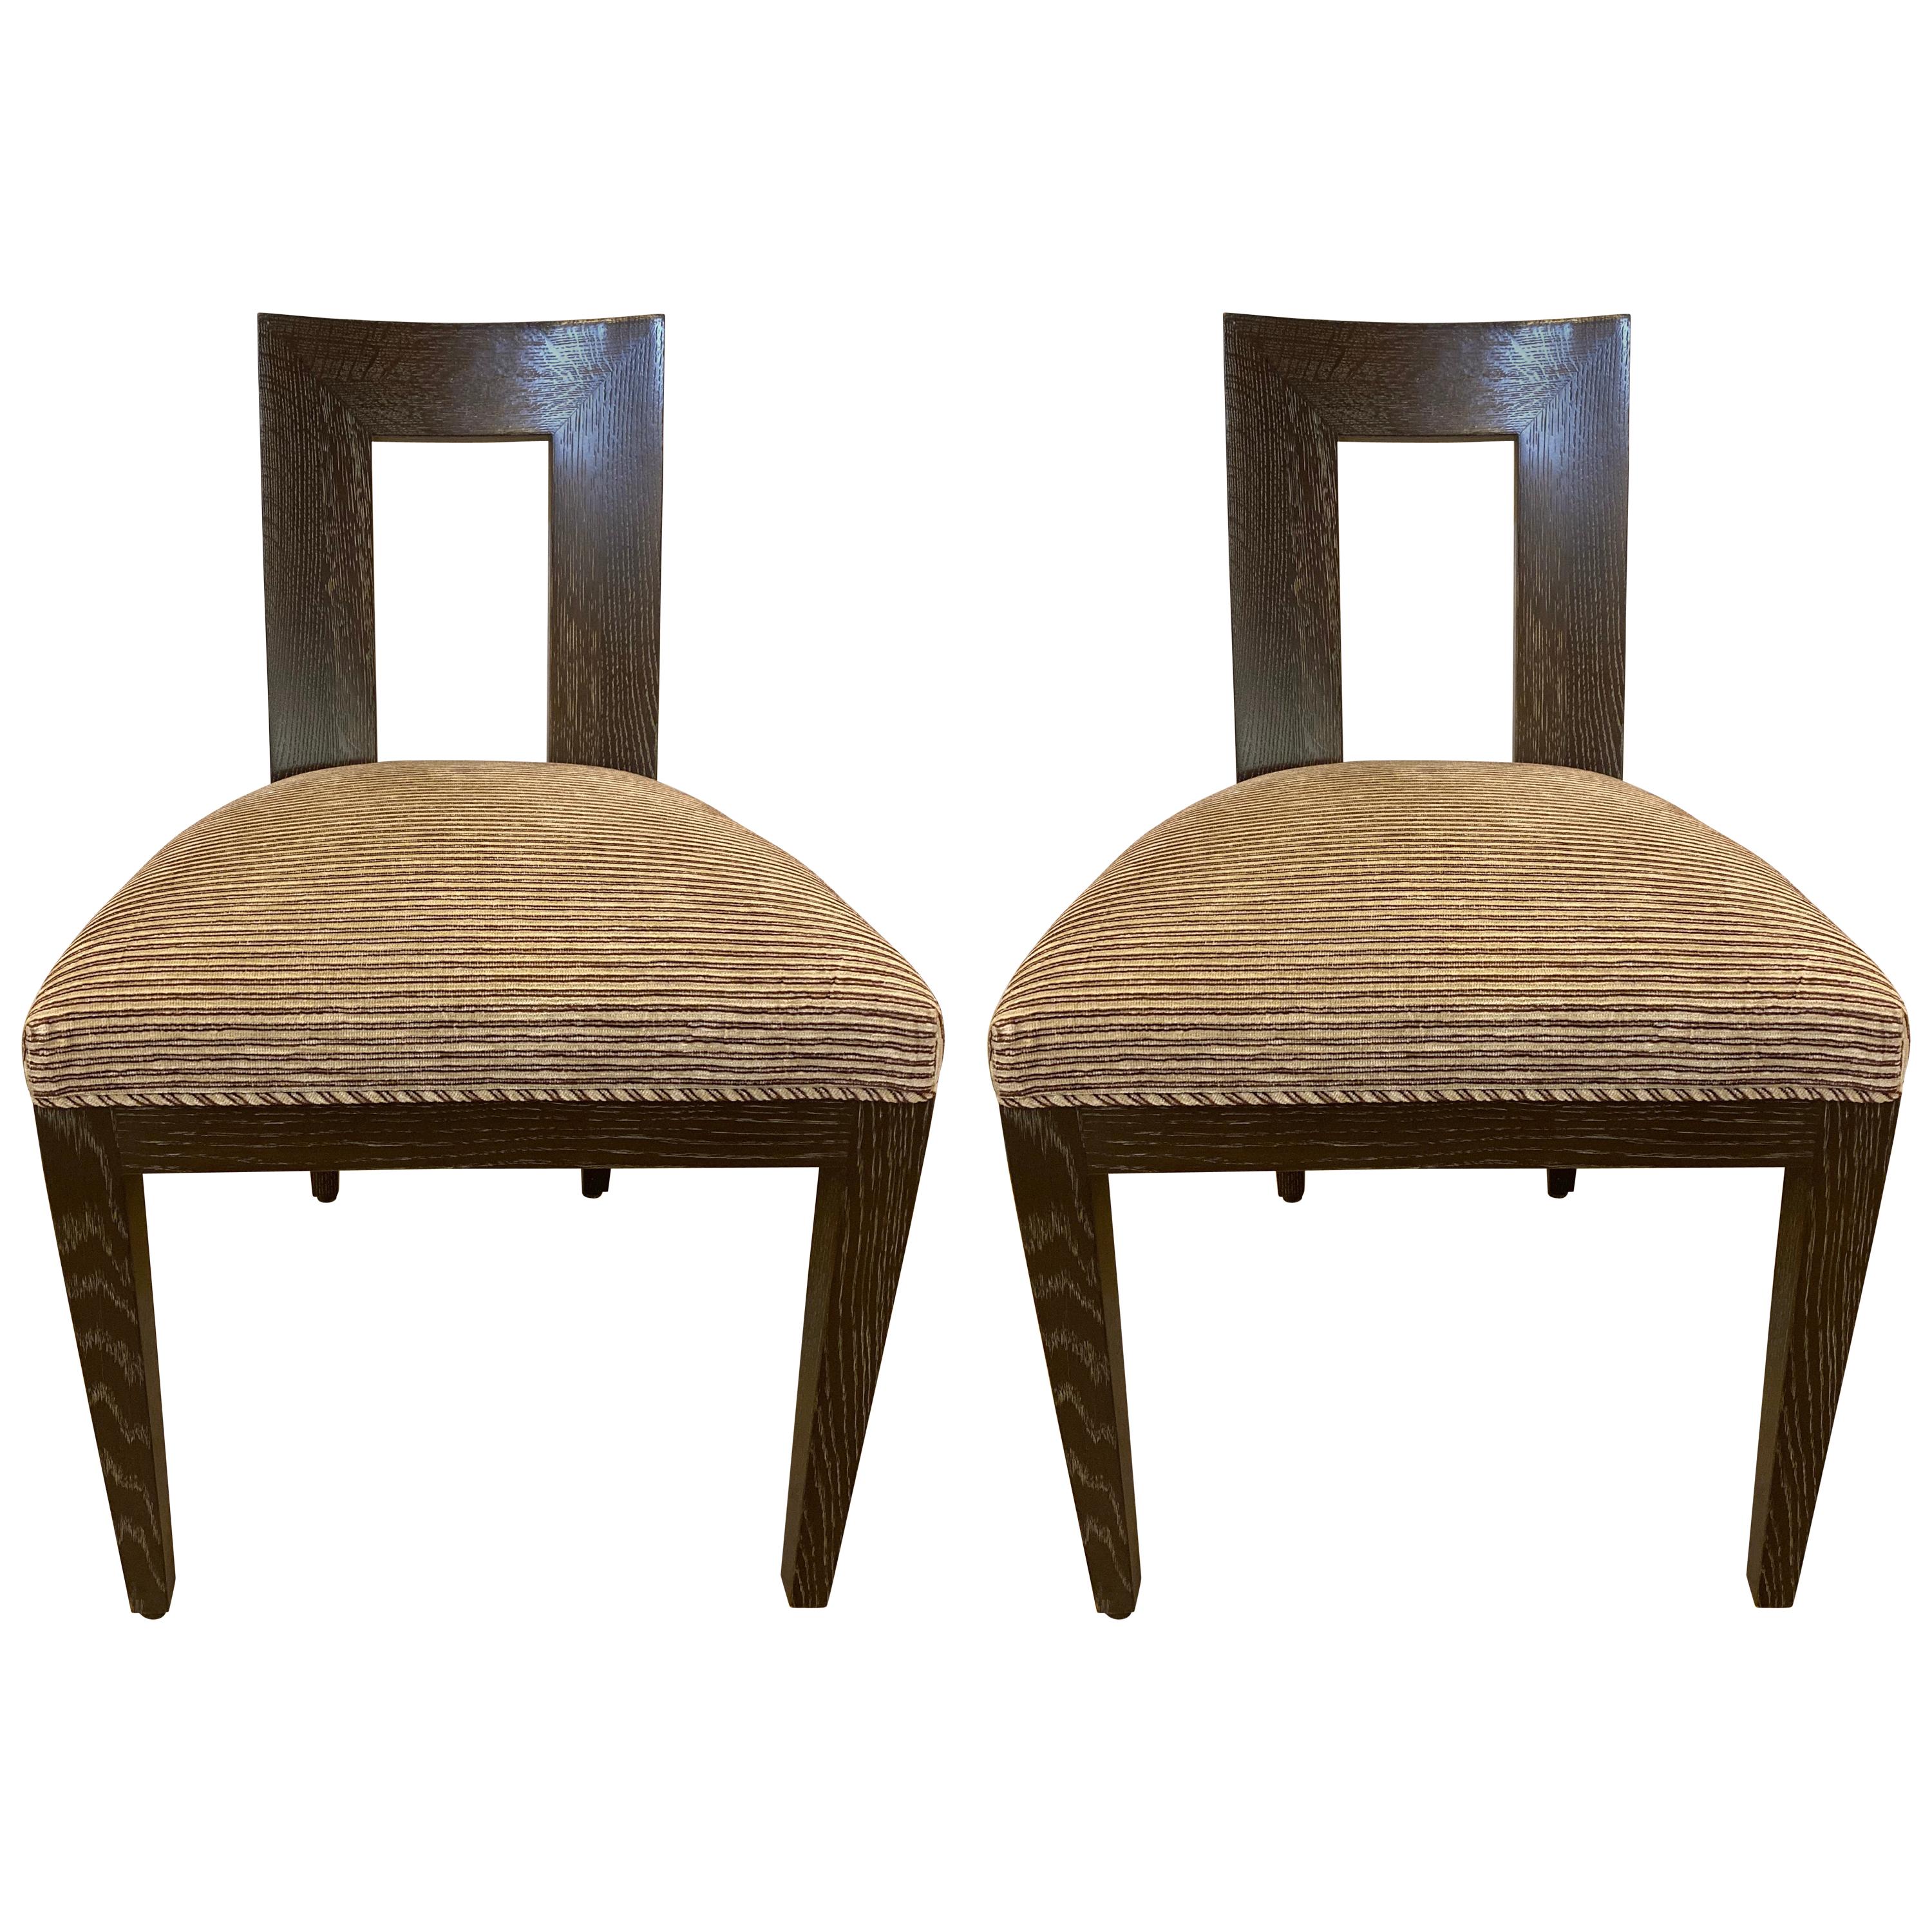 Set Ten Donghia 'Margarita' Design Dining Chairs Pickled Oak, Labeled Donghia